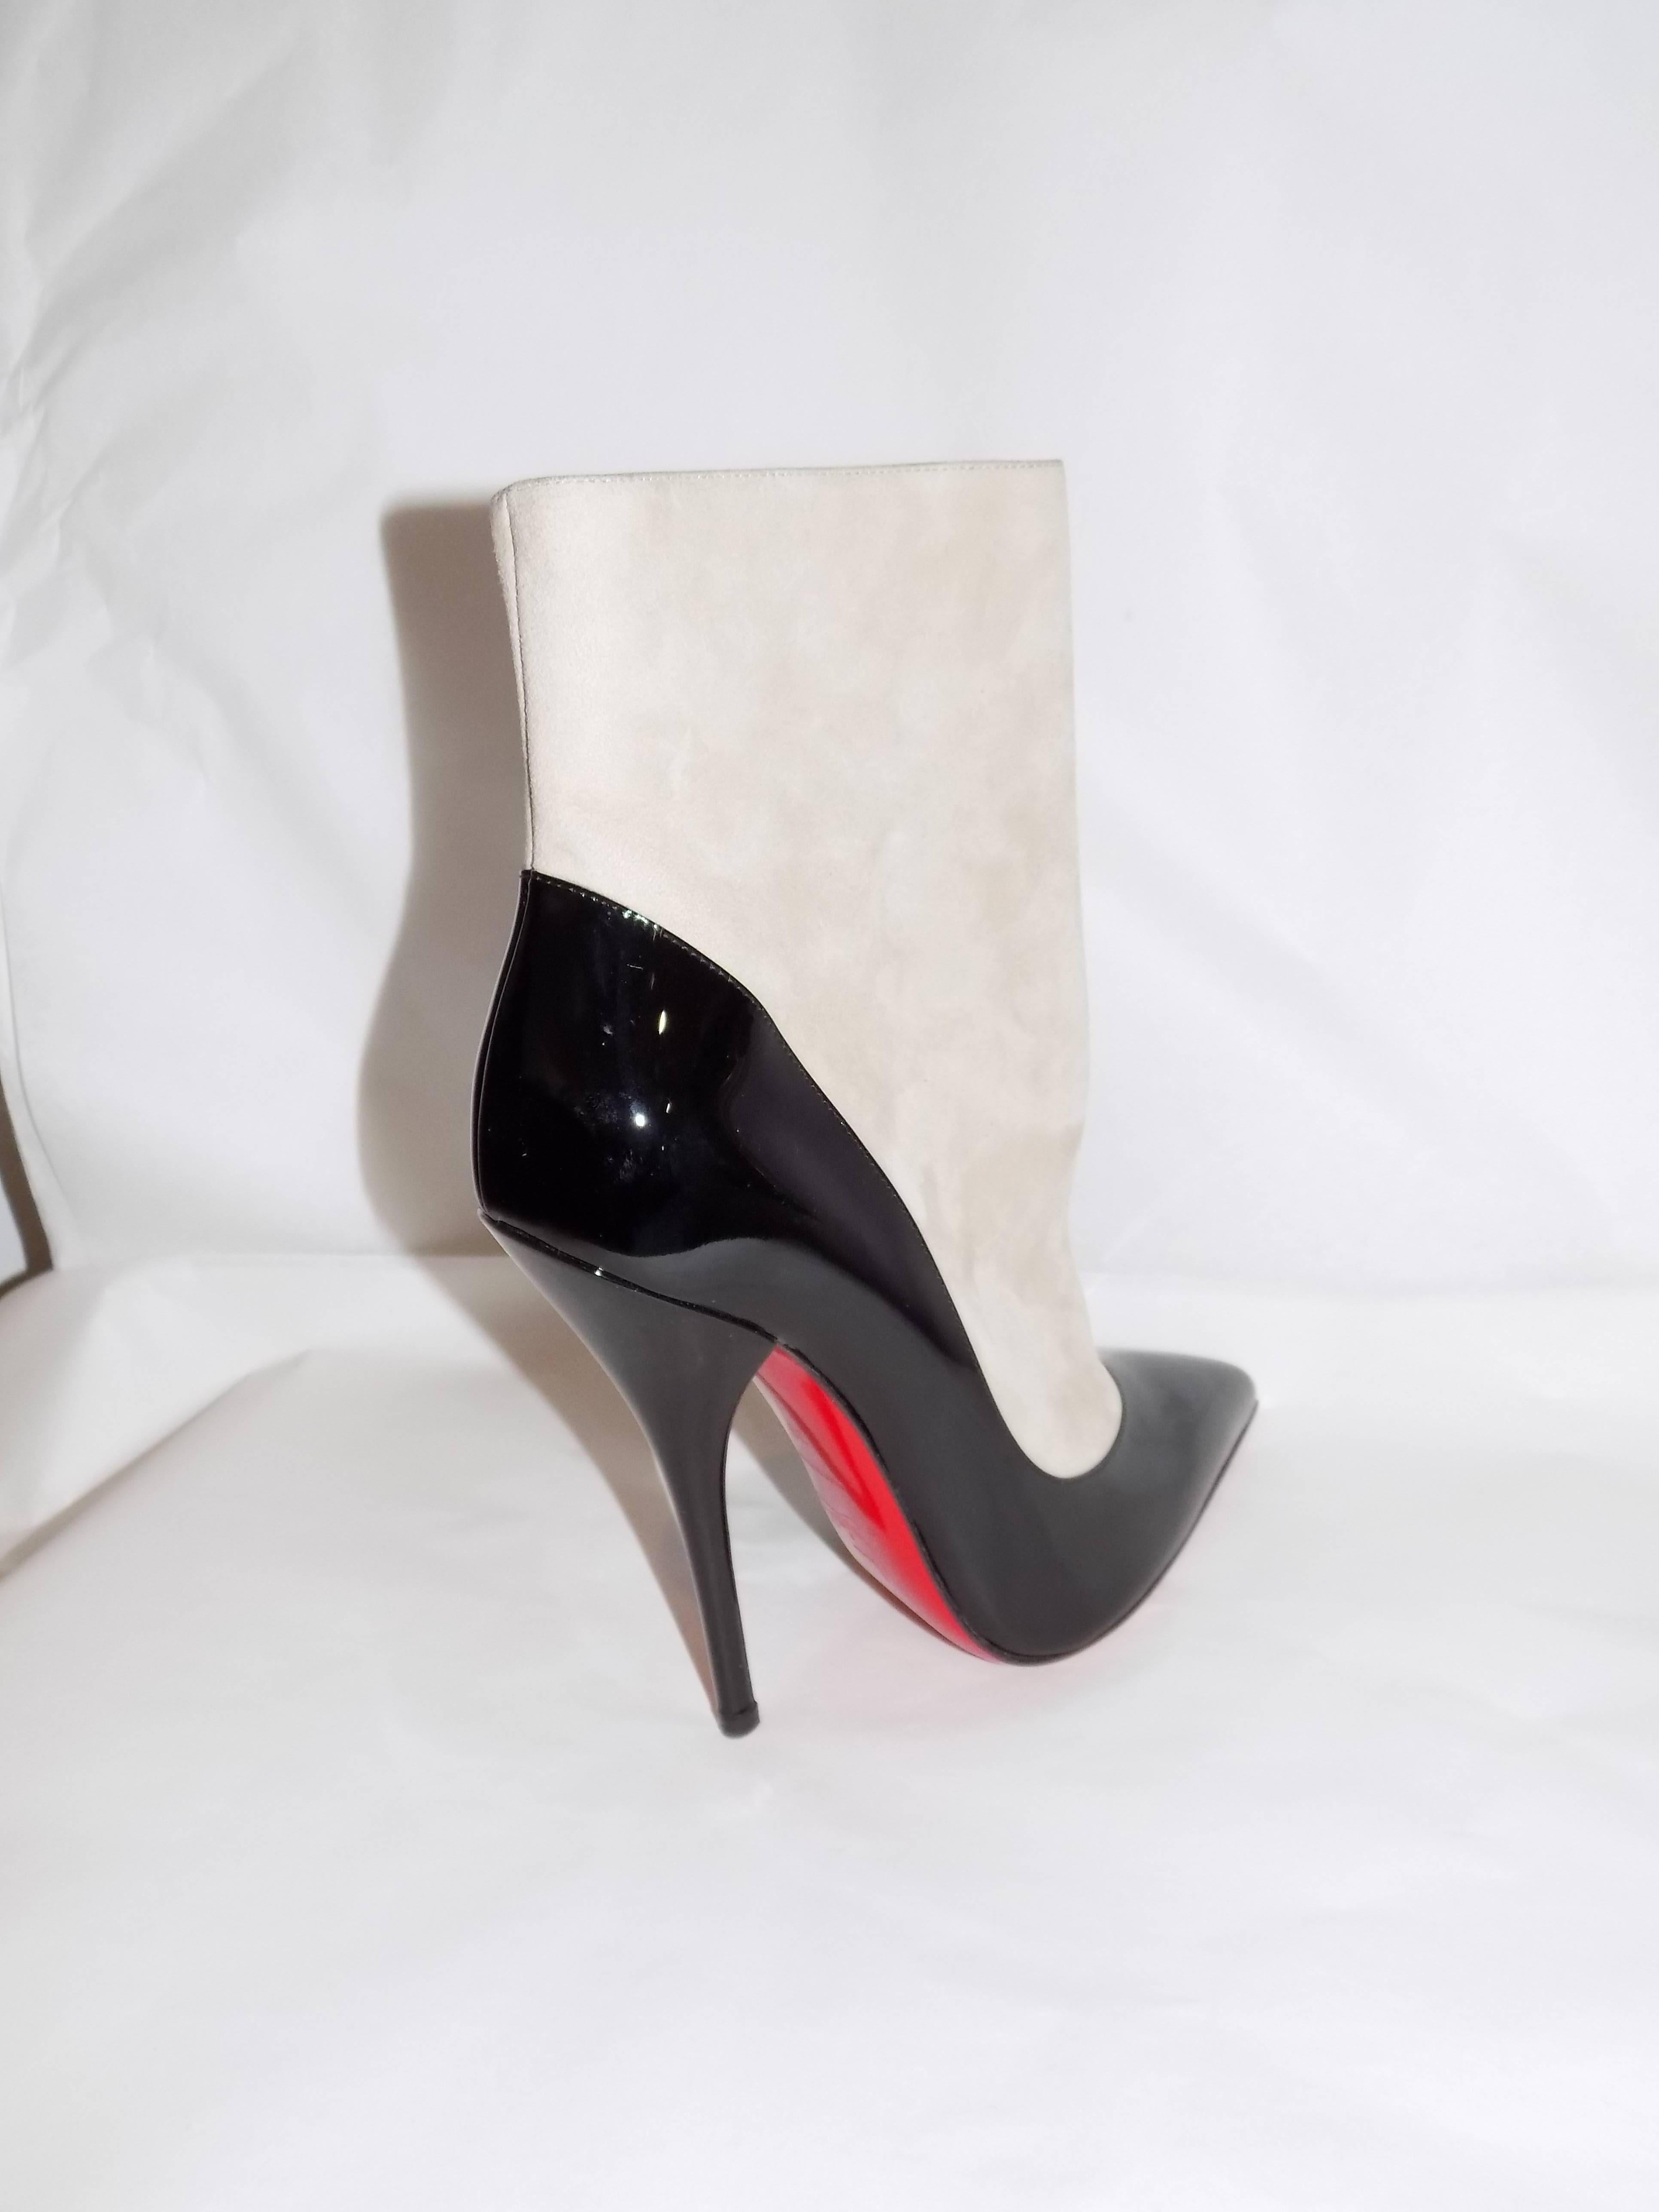 Beige Christian Louboutin suede and patent leather ankle boots New sz 39 